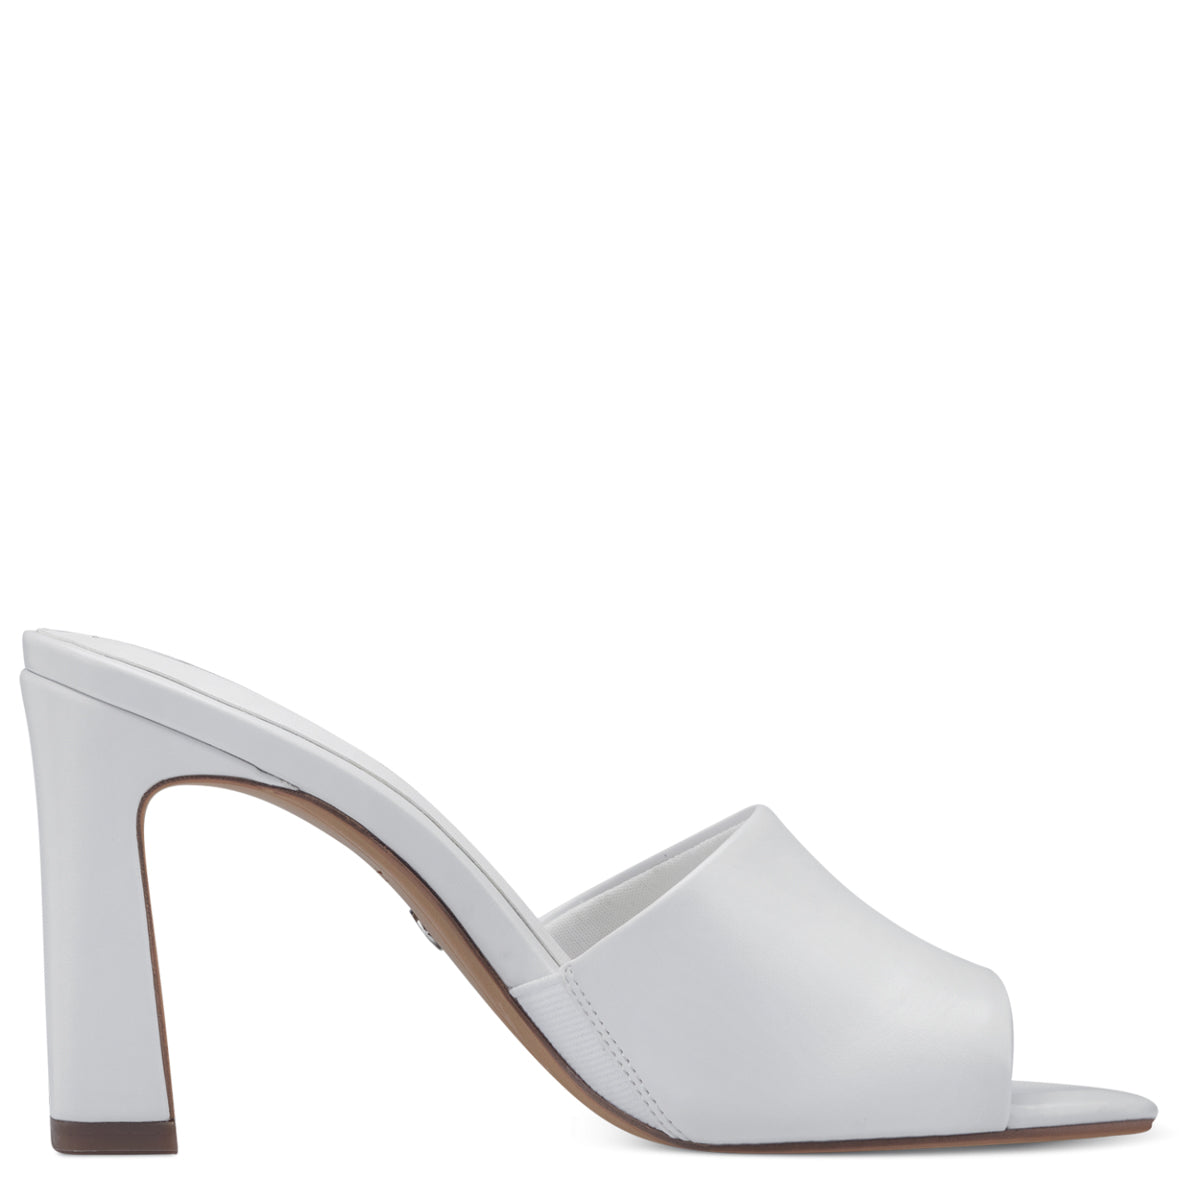 Trendy Heeled Sandal Mules with Open Toe in White